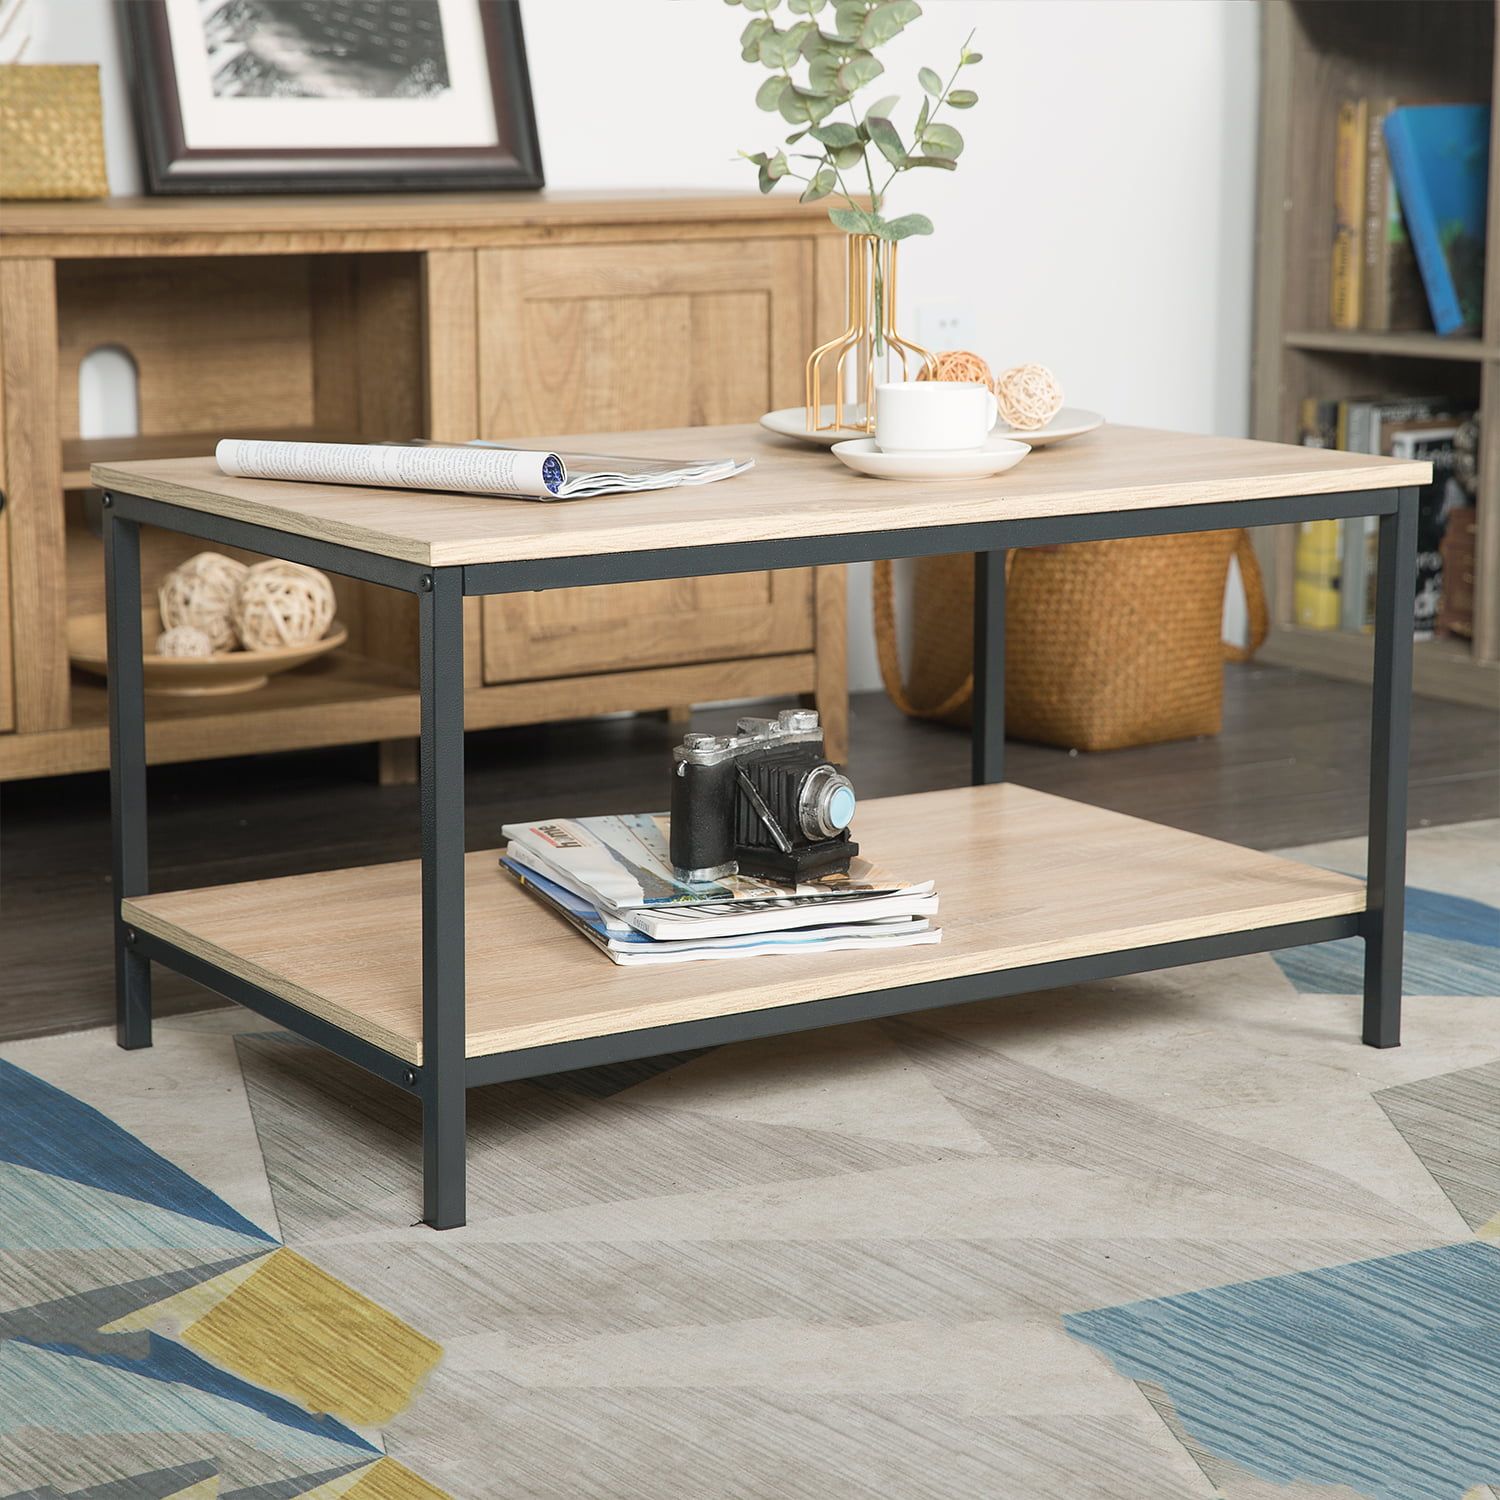 Finefind Modern Industrial Metal Rectangular Coffee Table With Storage Throughout Coffee Tables With Open Storage Shelves (View 16 of 20)